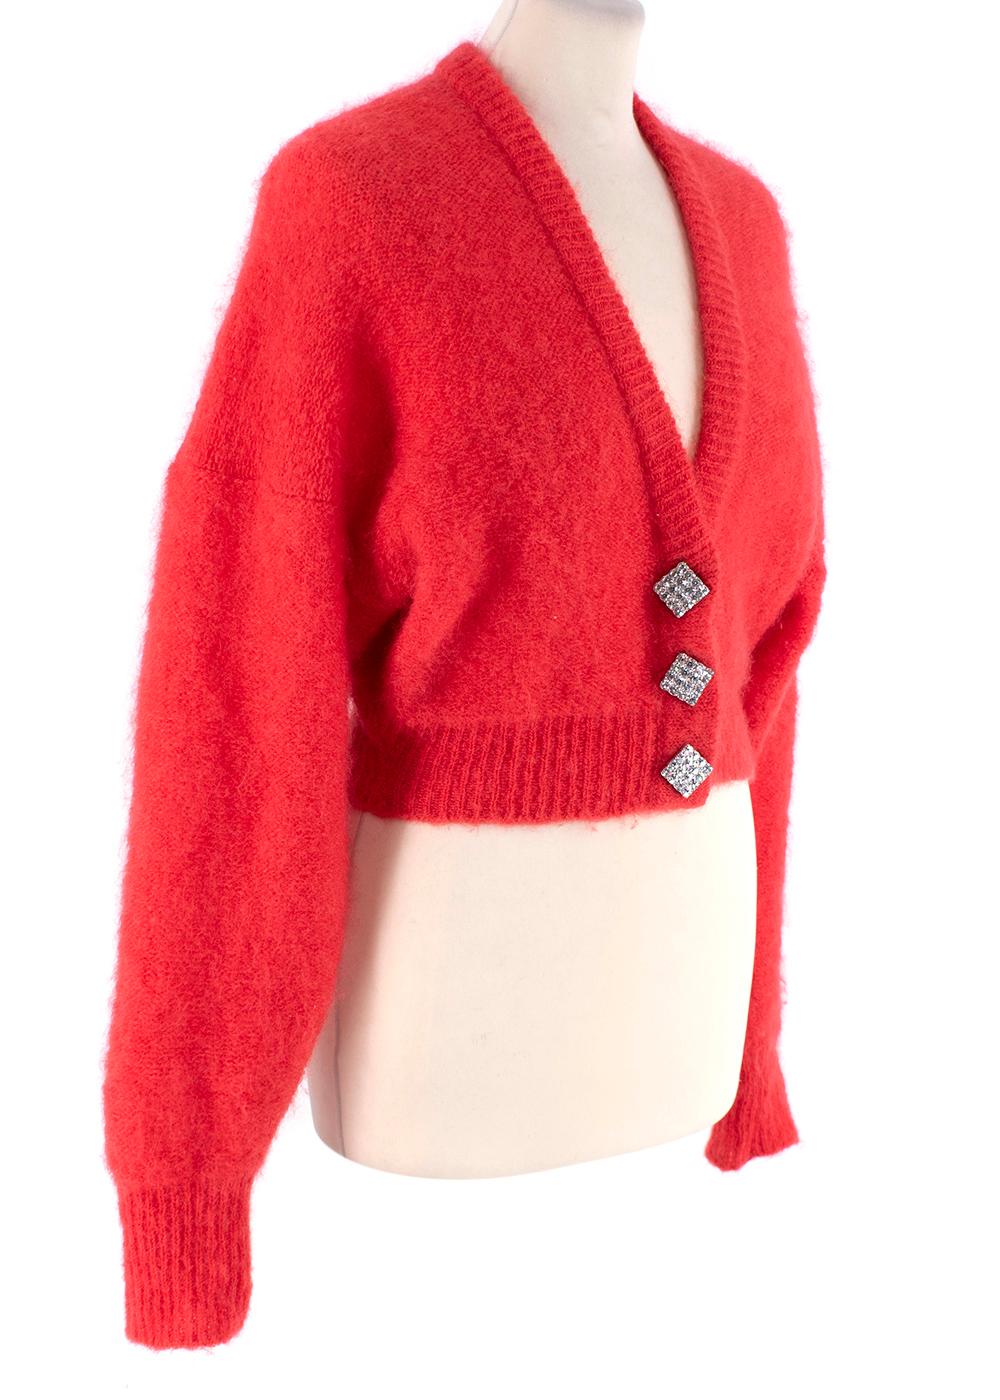 Alessandra Rich Crystal Embellished Mohair Blend Cardigan

- Square shaped crystal embellished button fastening at the front
- Ribbed cuffs and hem
- Deep V-neck
- Cropped fit

Materials:
82% Mohair
8% Elastane

Made in Italy
Dry clean only

PLEASE